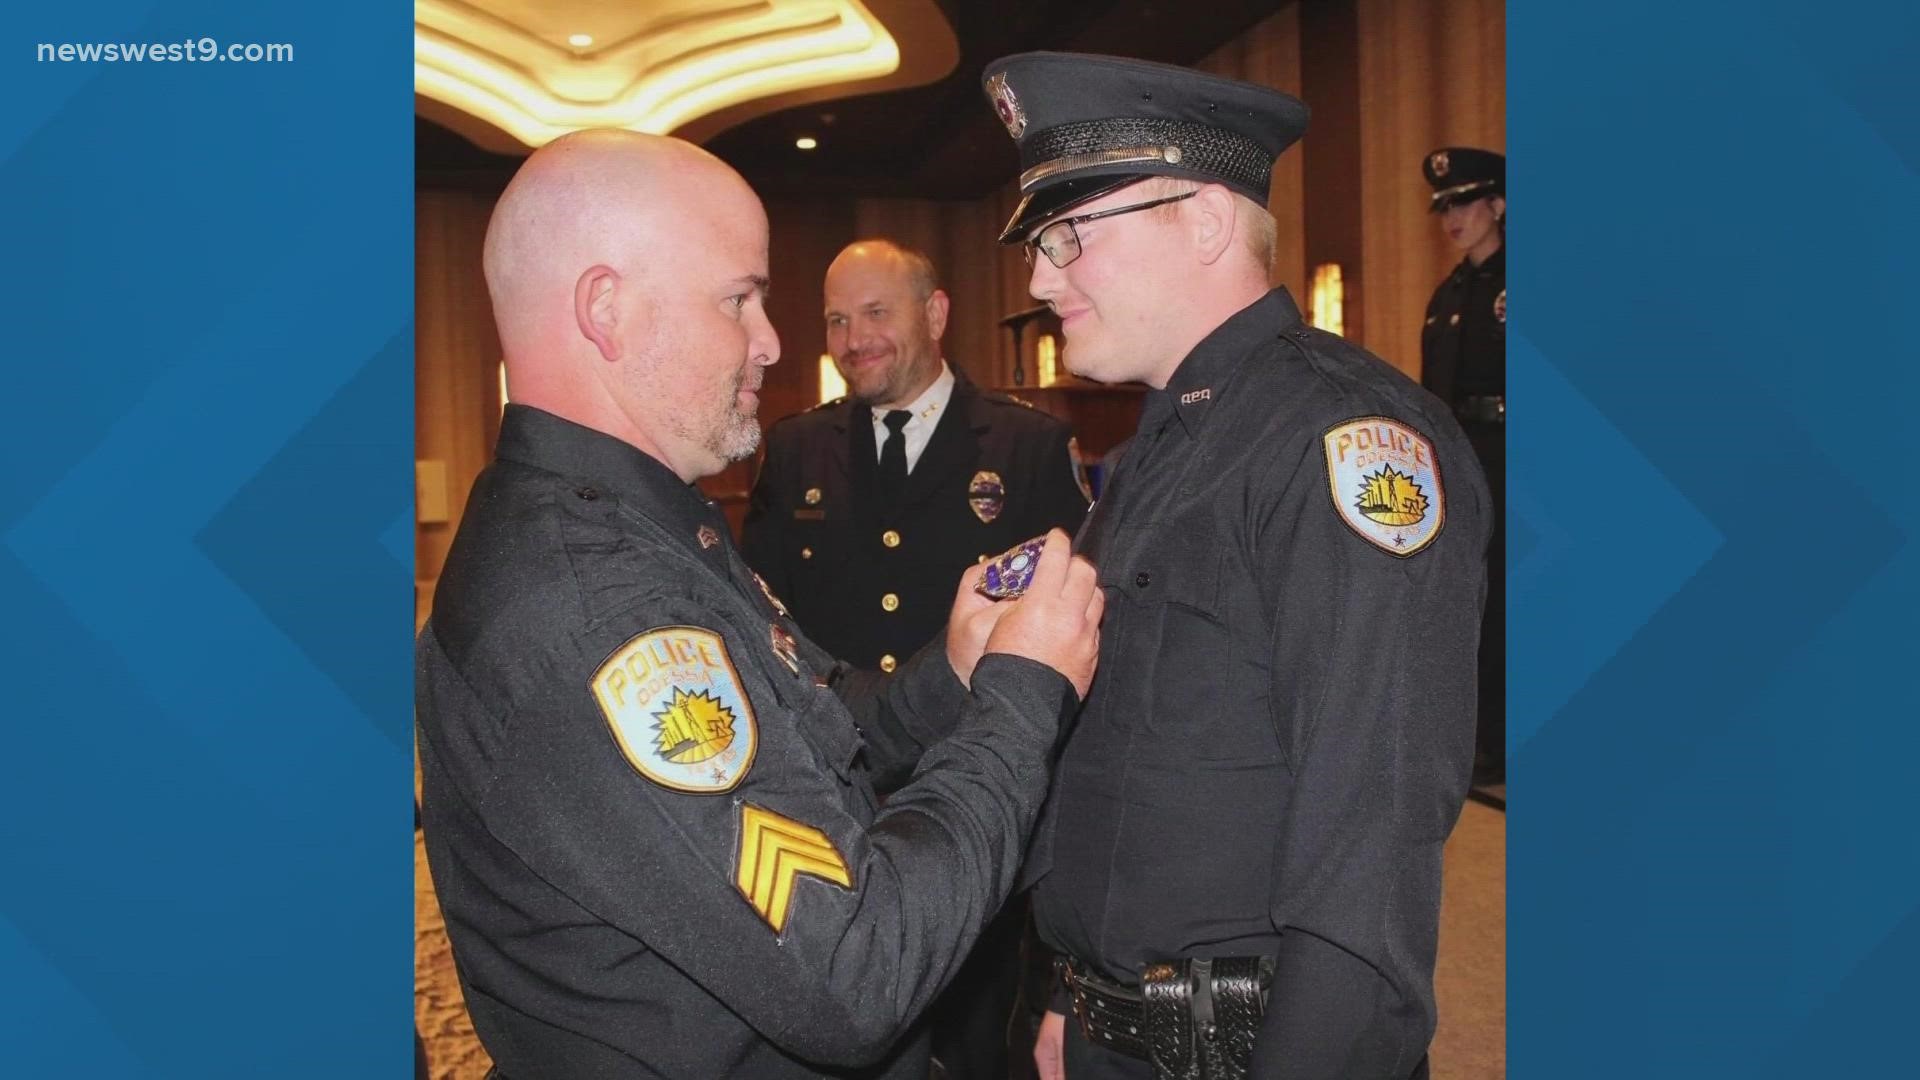 Rusty Martin was there to pin the badge on Taylor following his graduation.